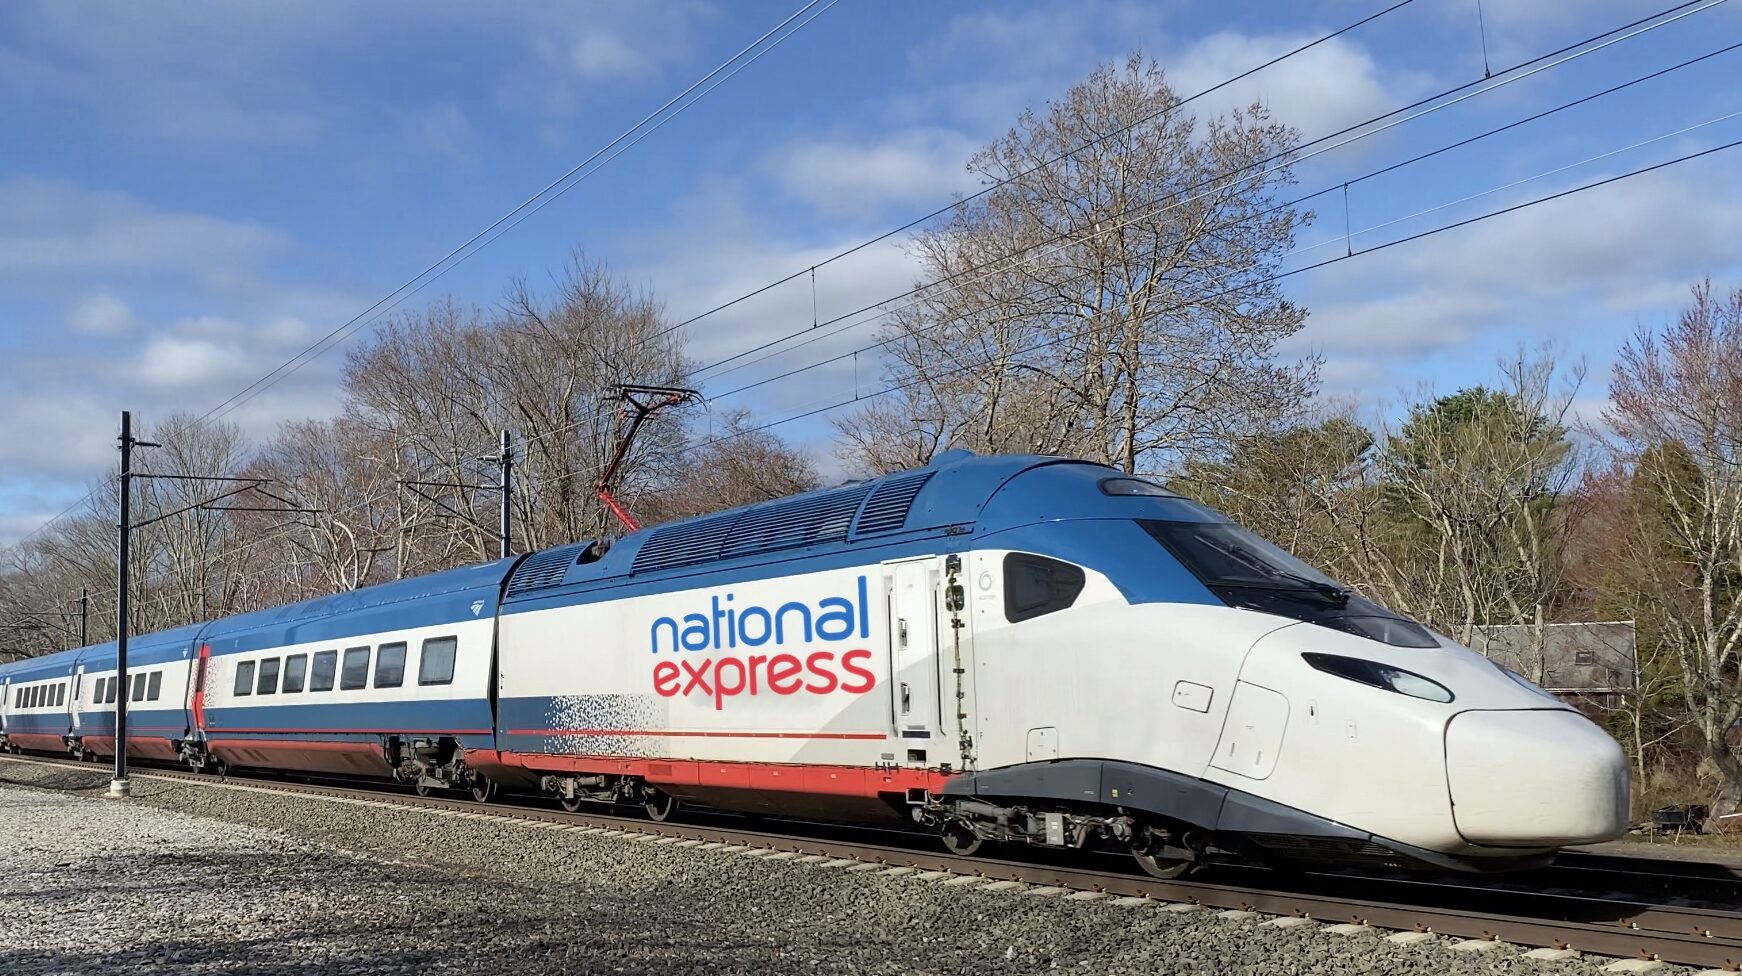 SNCF orders 100 'TGV of the Future' trains from Alstom